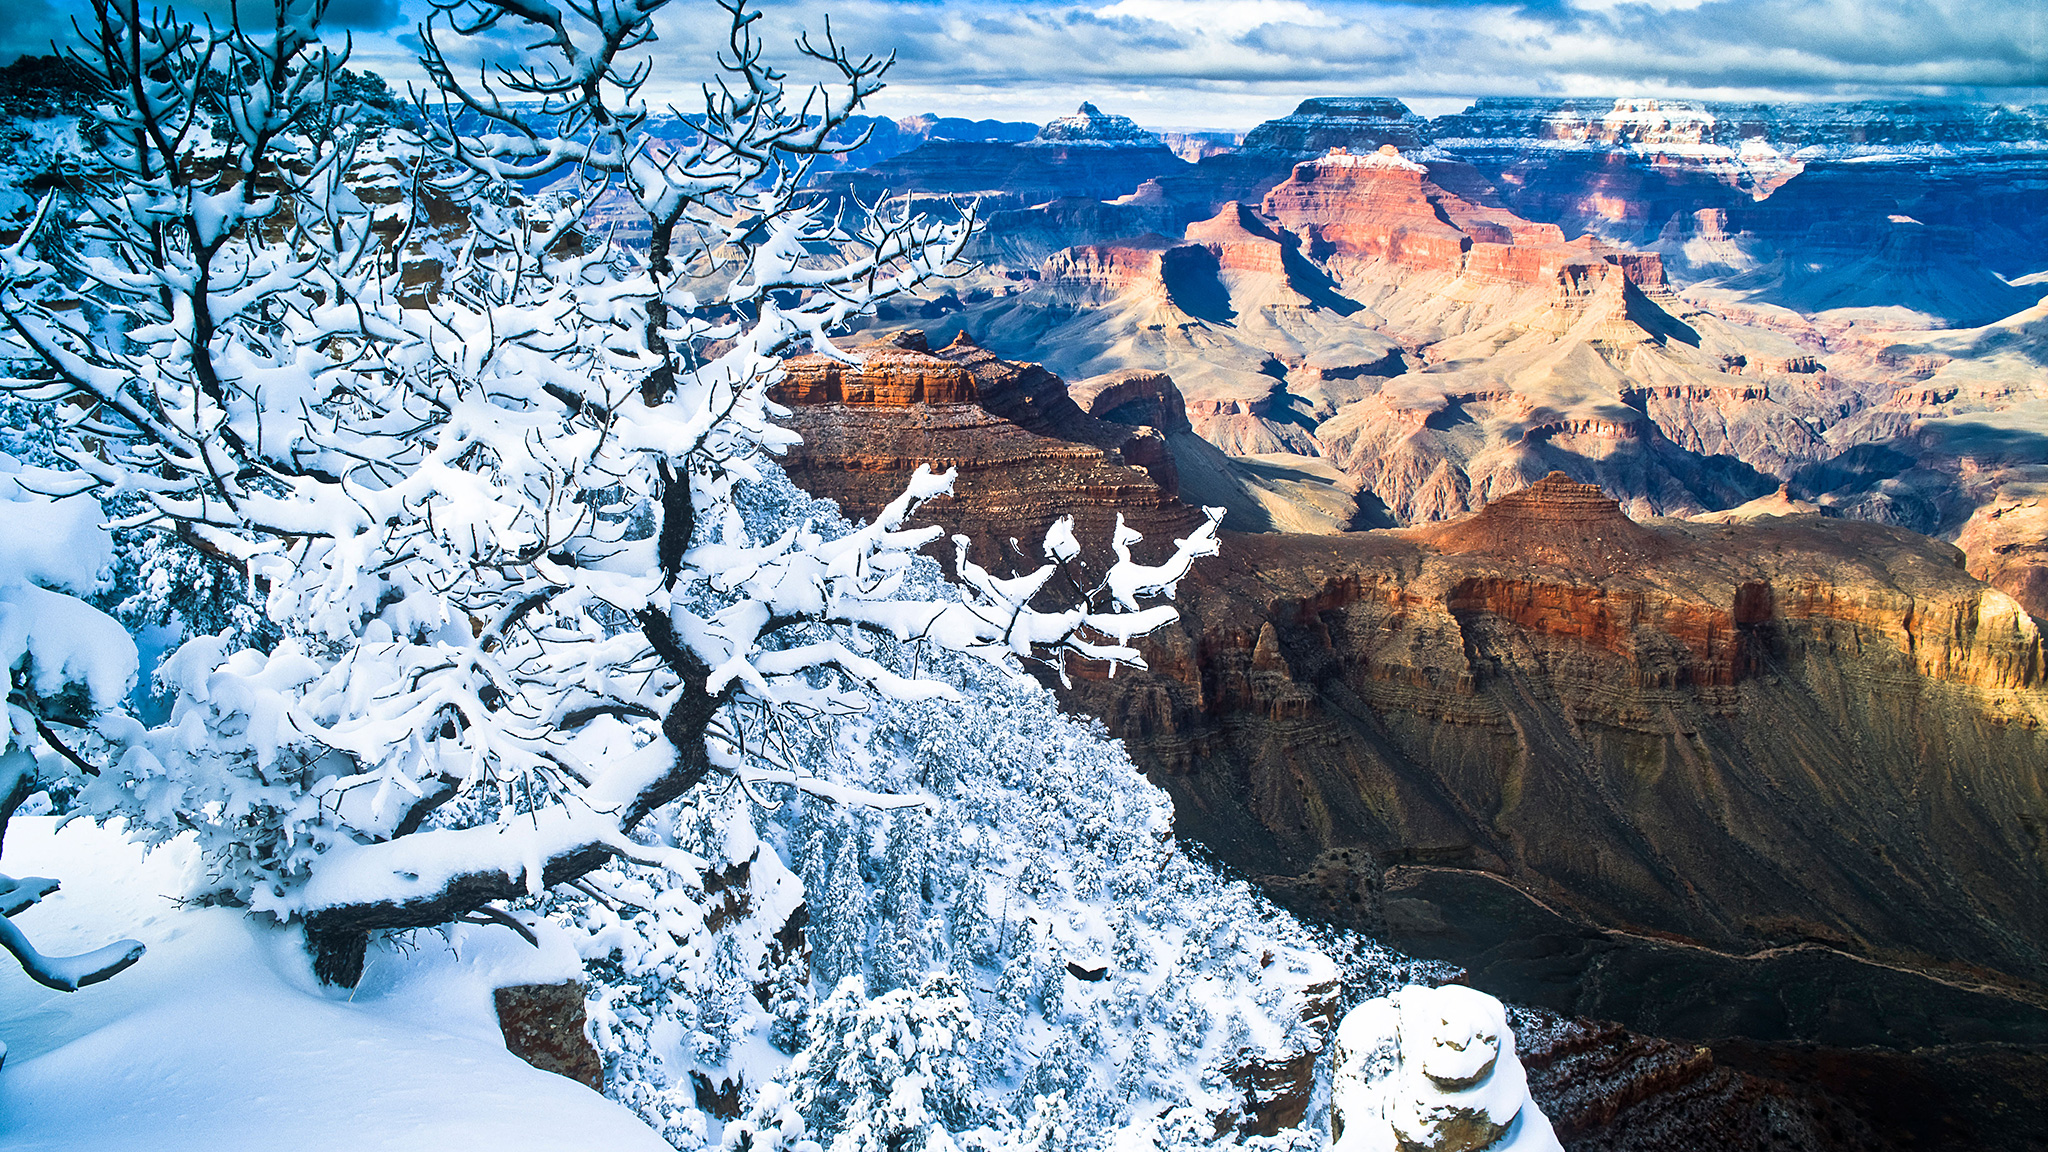 Winter hiking in the Grand Canyon